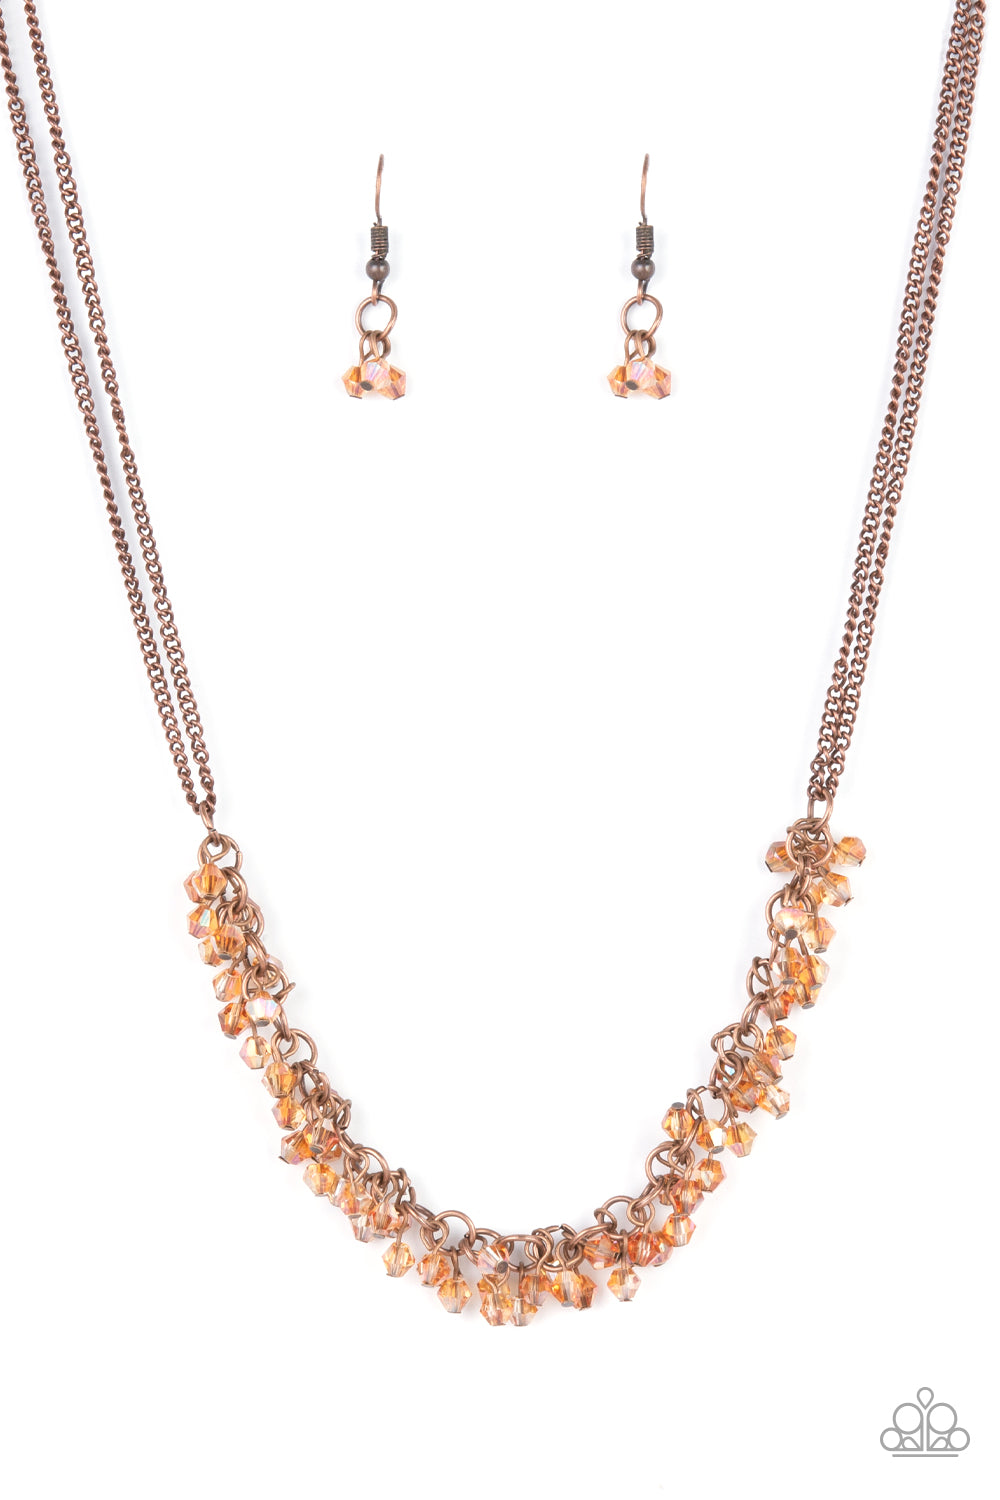 Let There Be TWILIGHT - copper - Paparazzi necklace